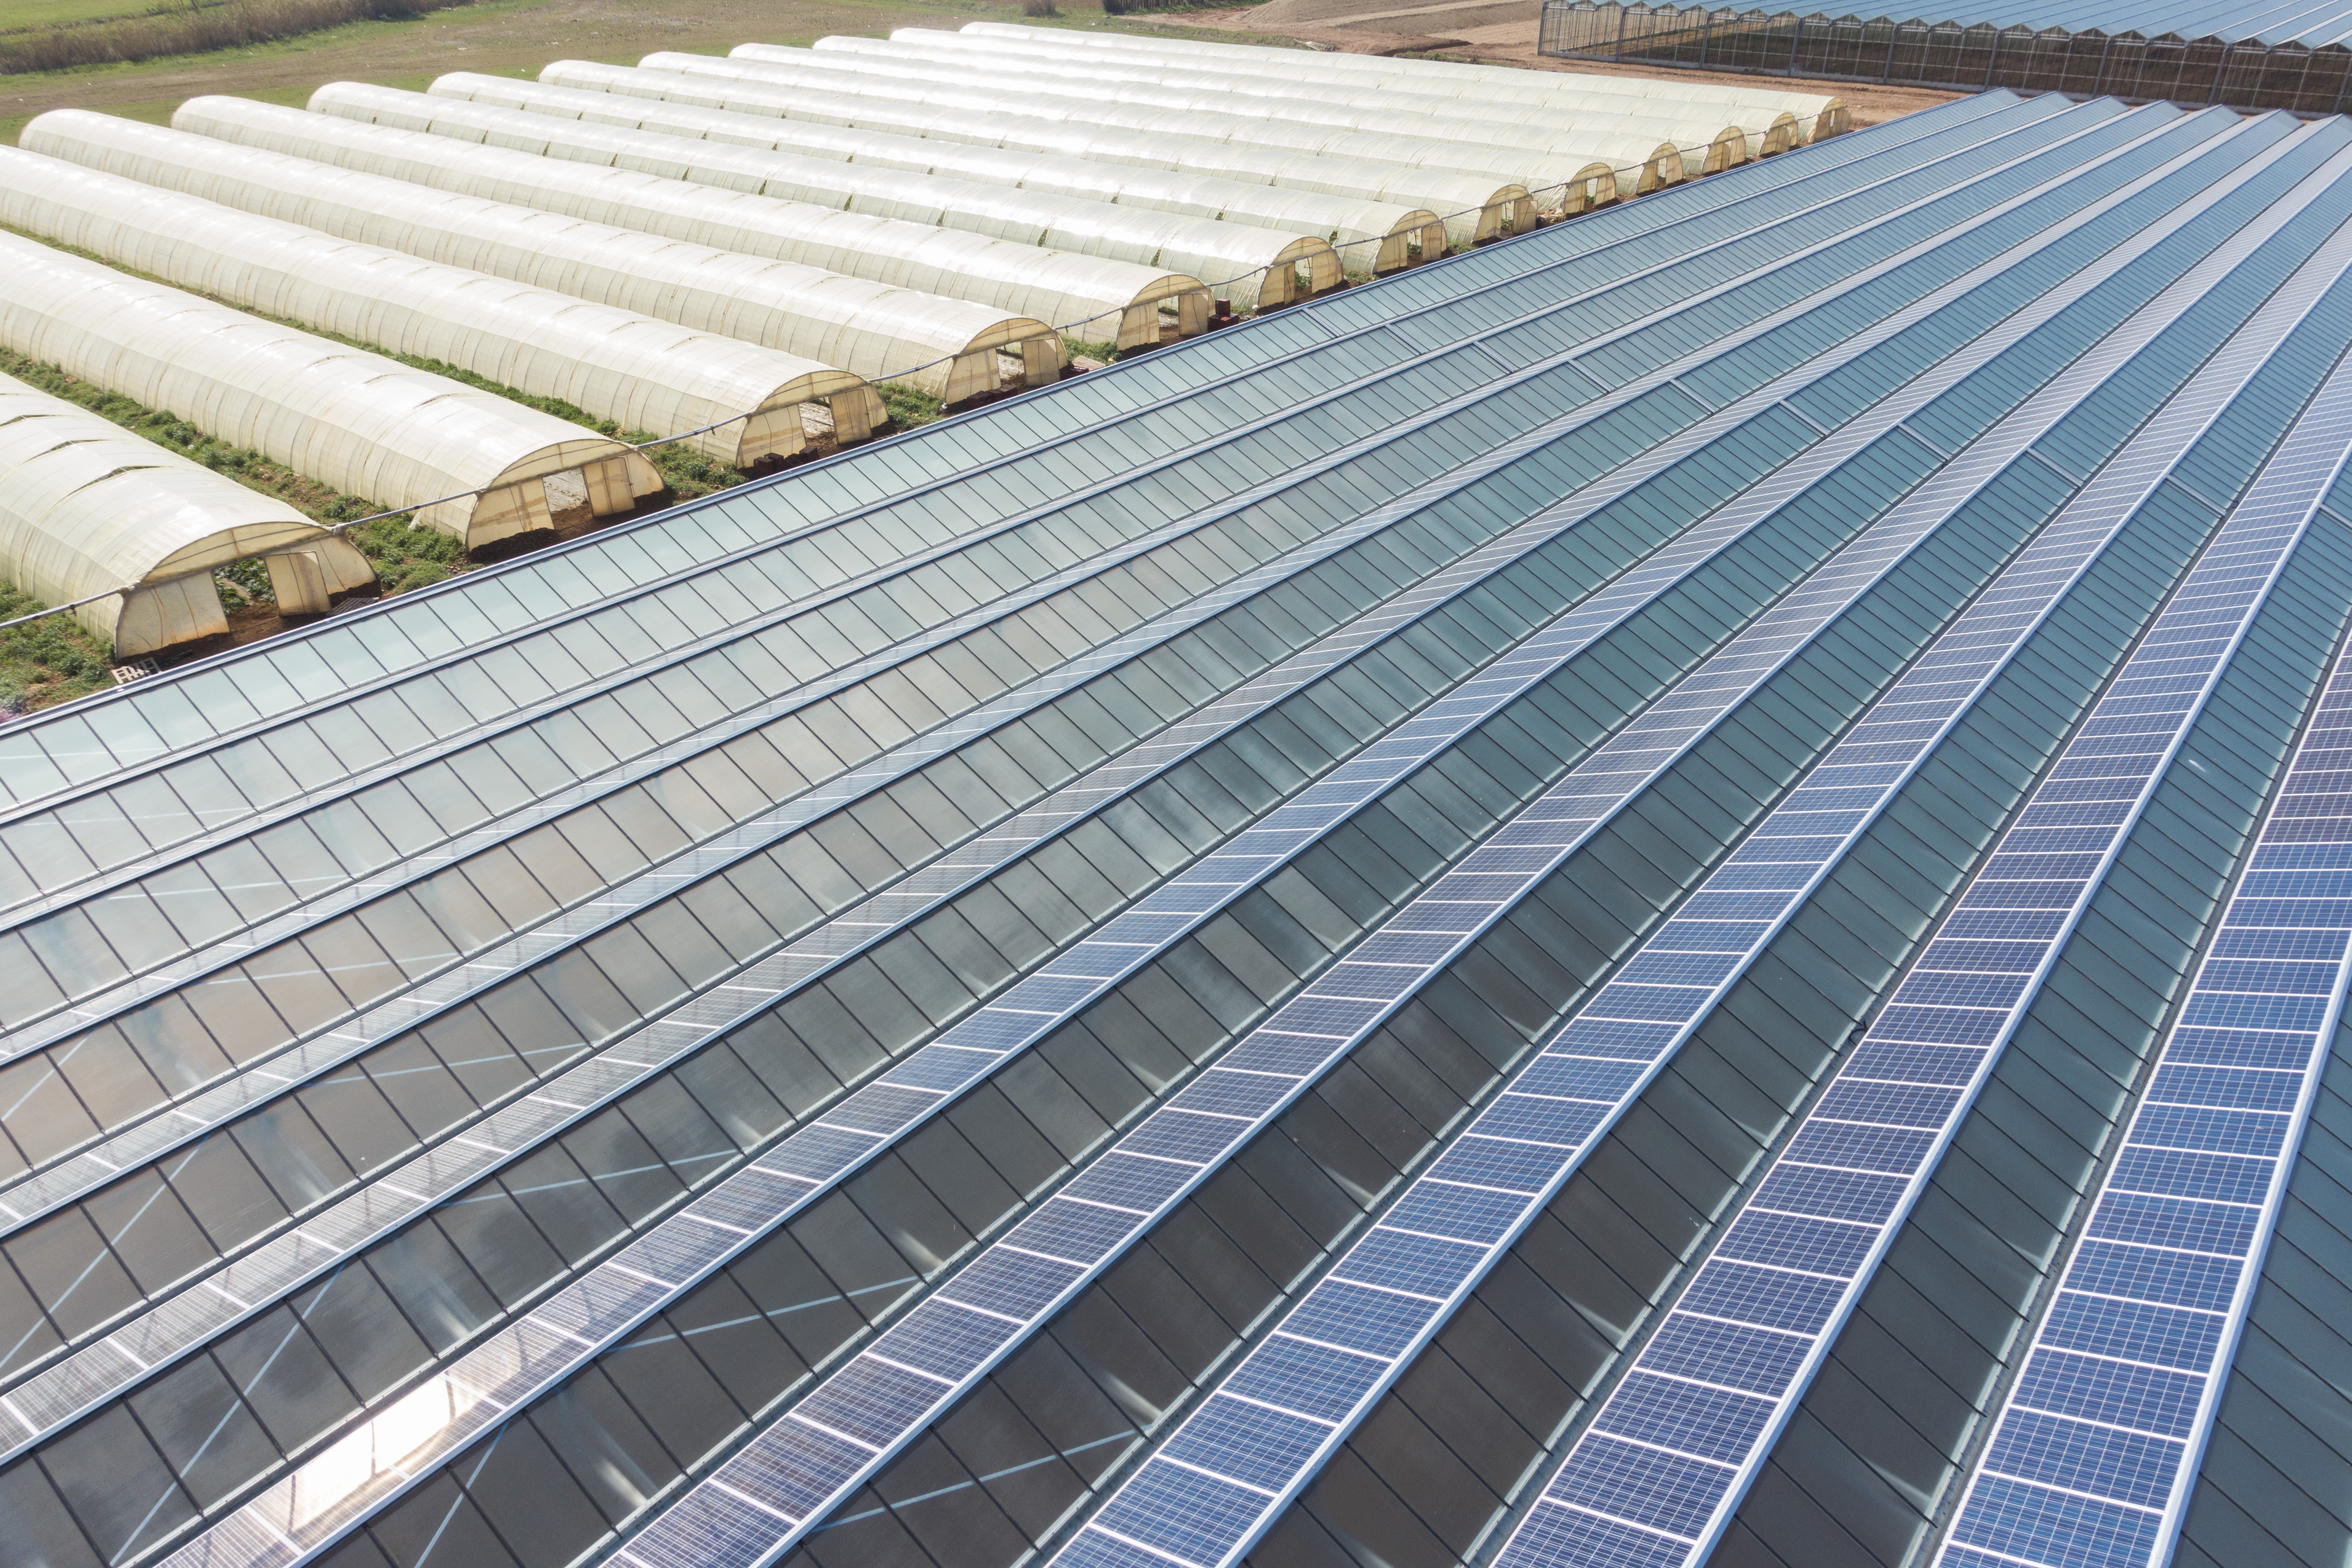 Photovoltaic greenhouses produce green electricity, protect plants from weather and optimise working conditions.